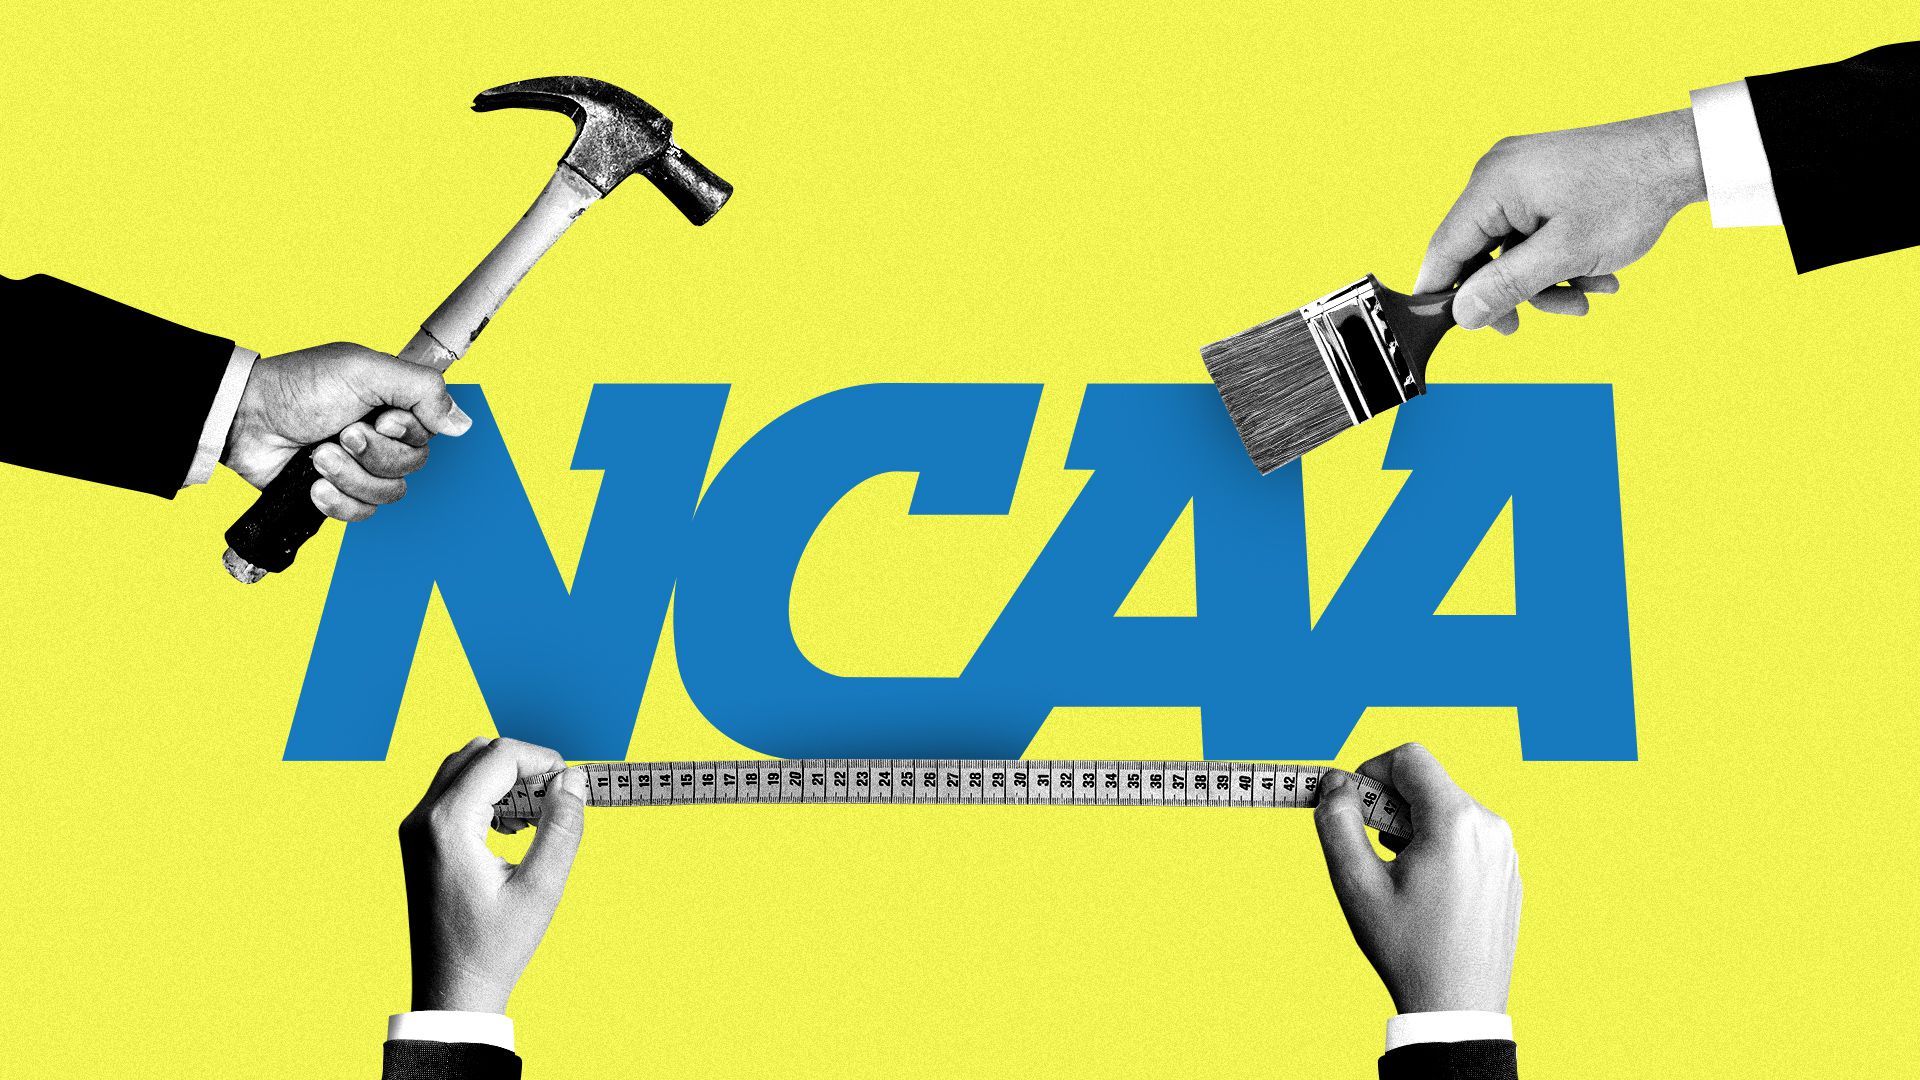 Illustration of hands holding a paintbrush, hammer, and measuring tape up against the NCAA logo